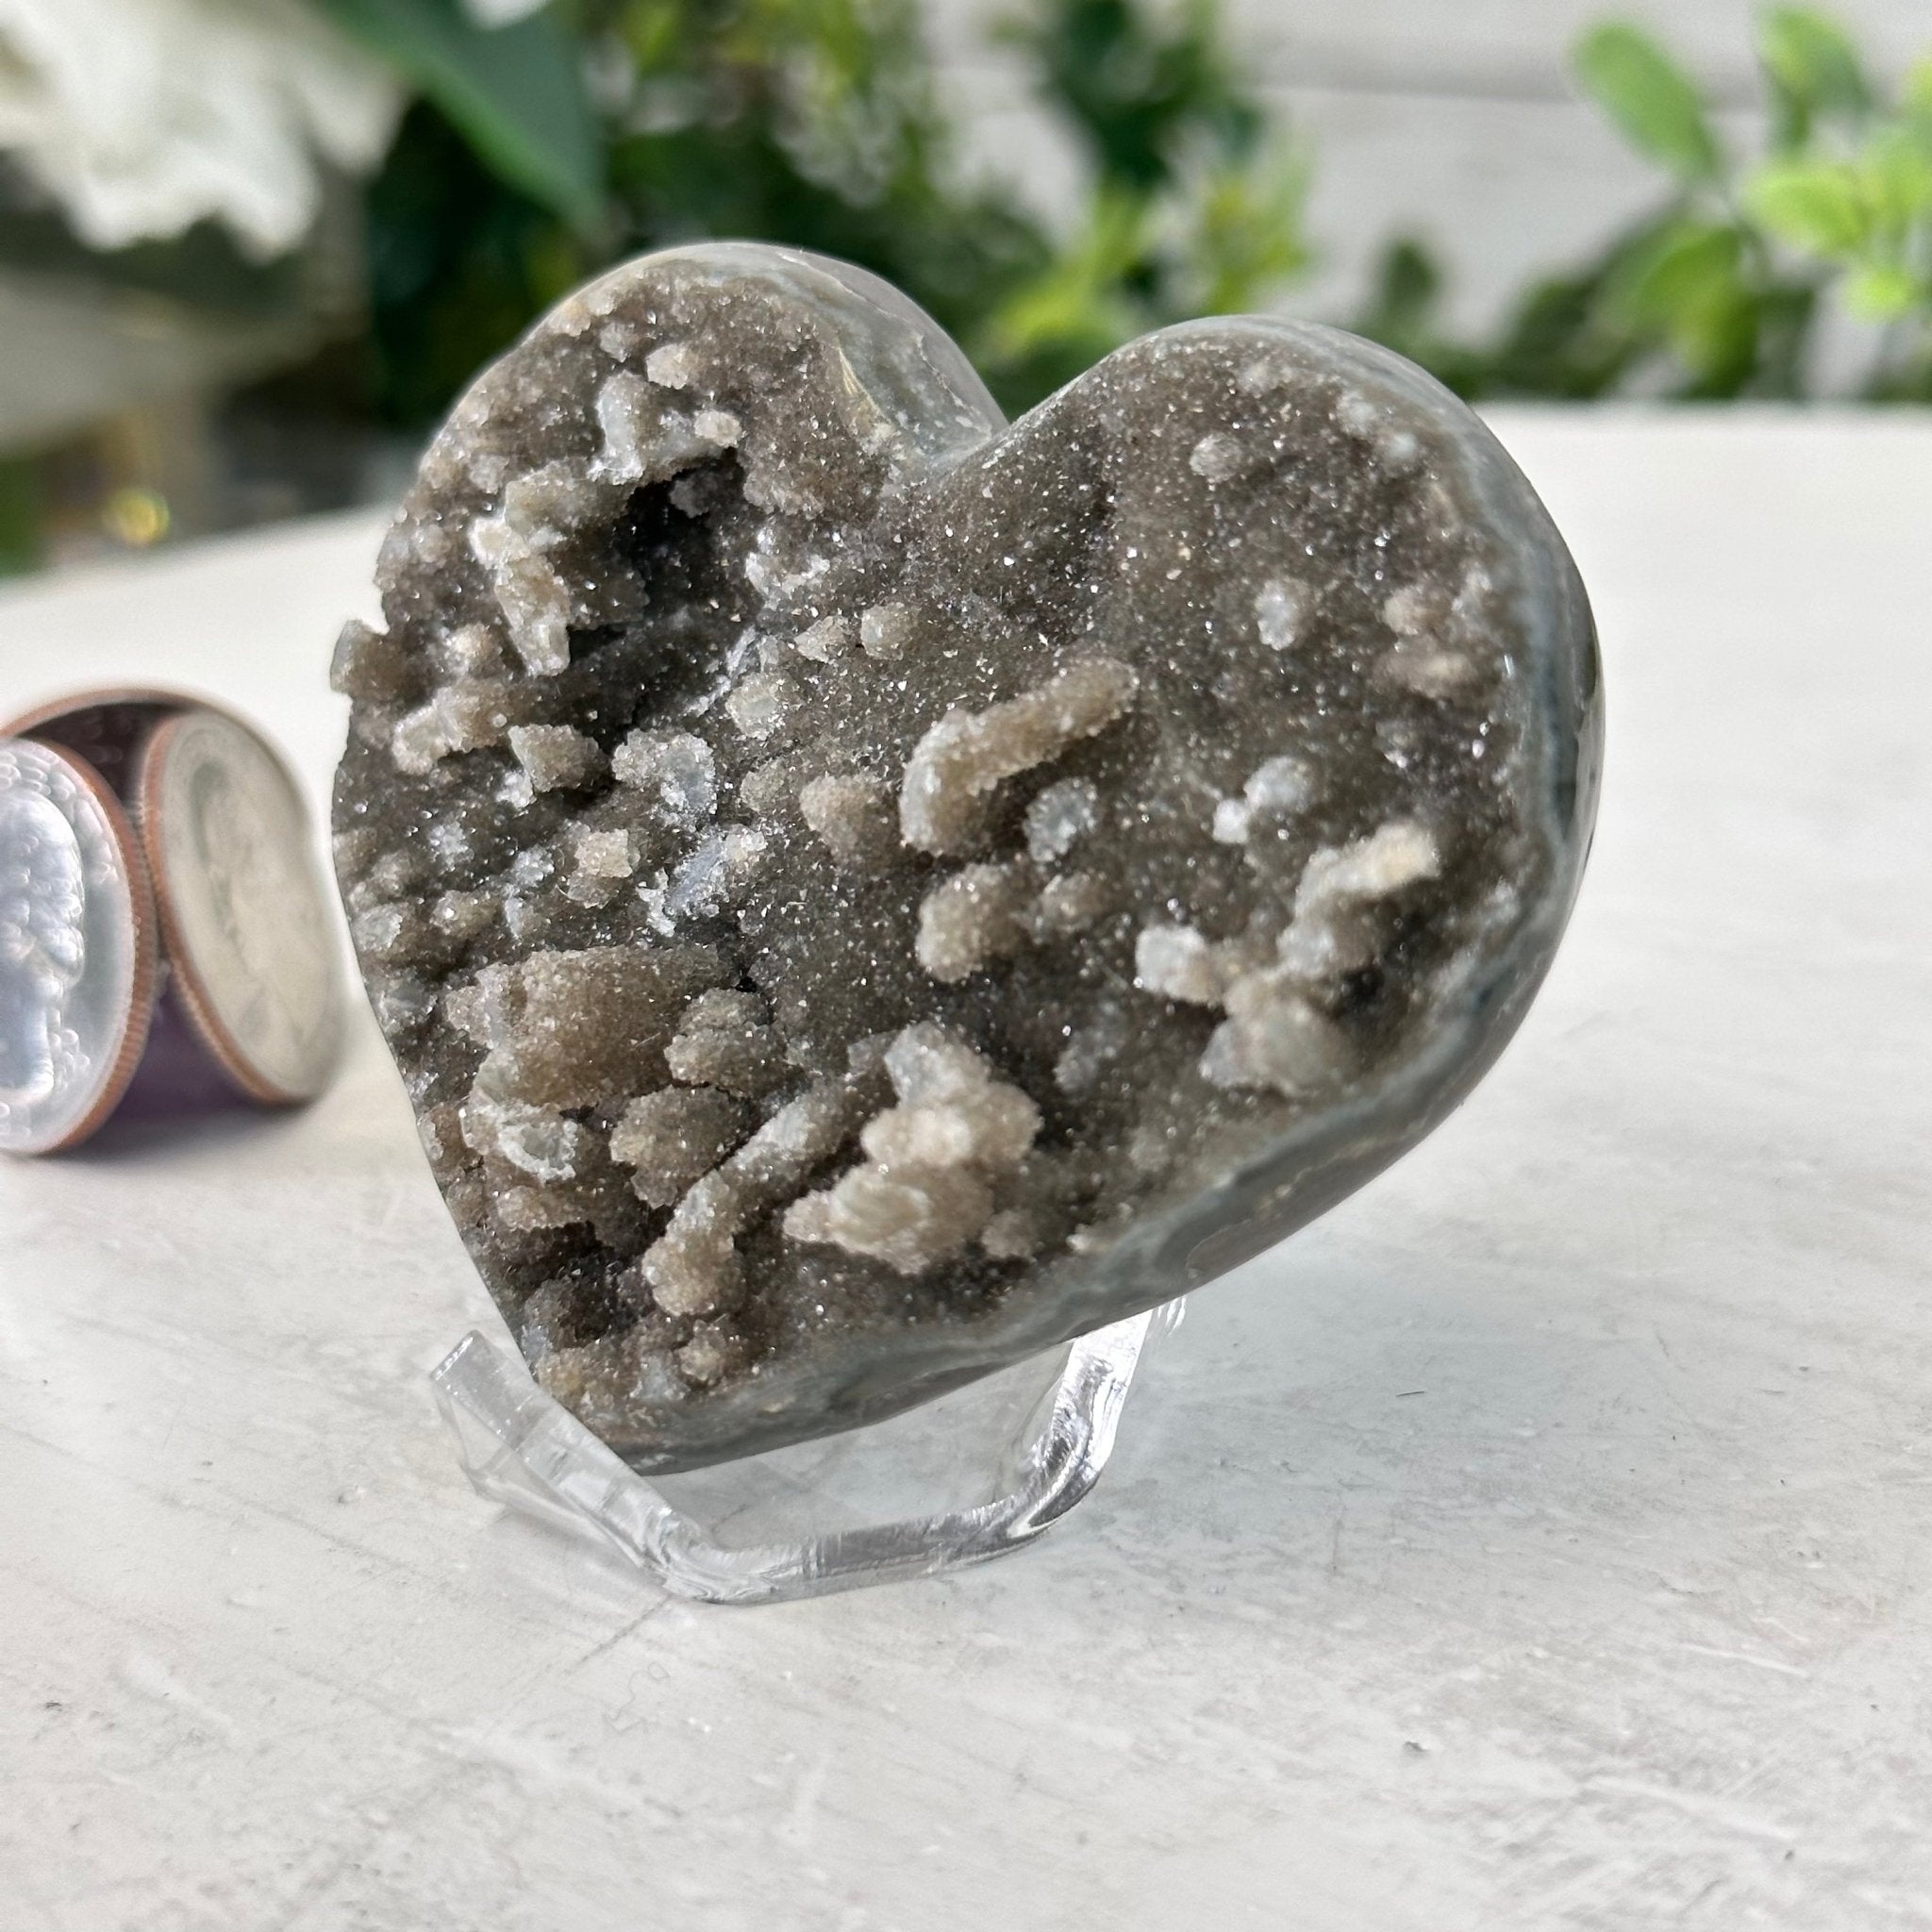 Extra Quality Amethyst Heart Geode on an Acrylic Stand, 0.24 lbs & 2.2" Tall #5462-0022 by Brazil Gems - Brazil GemsBrazil GemsExtra Quality Amethyst Heart Geode on an Acrylic Stand, 0.24 lbs & 2.2" Tall #5462-0022 by Brazil GemsHearts5462-0022